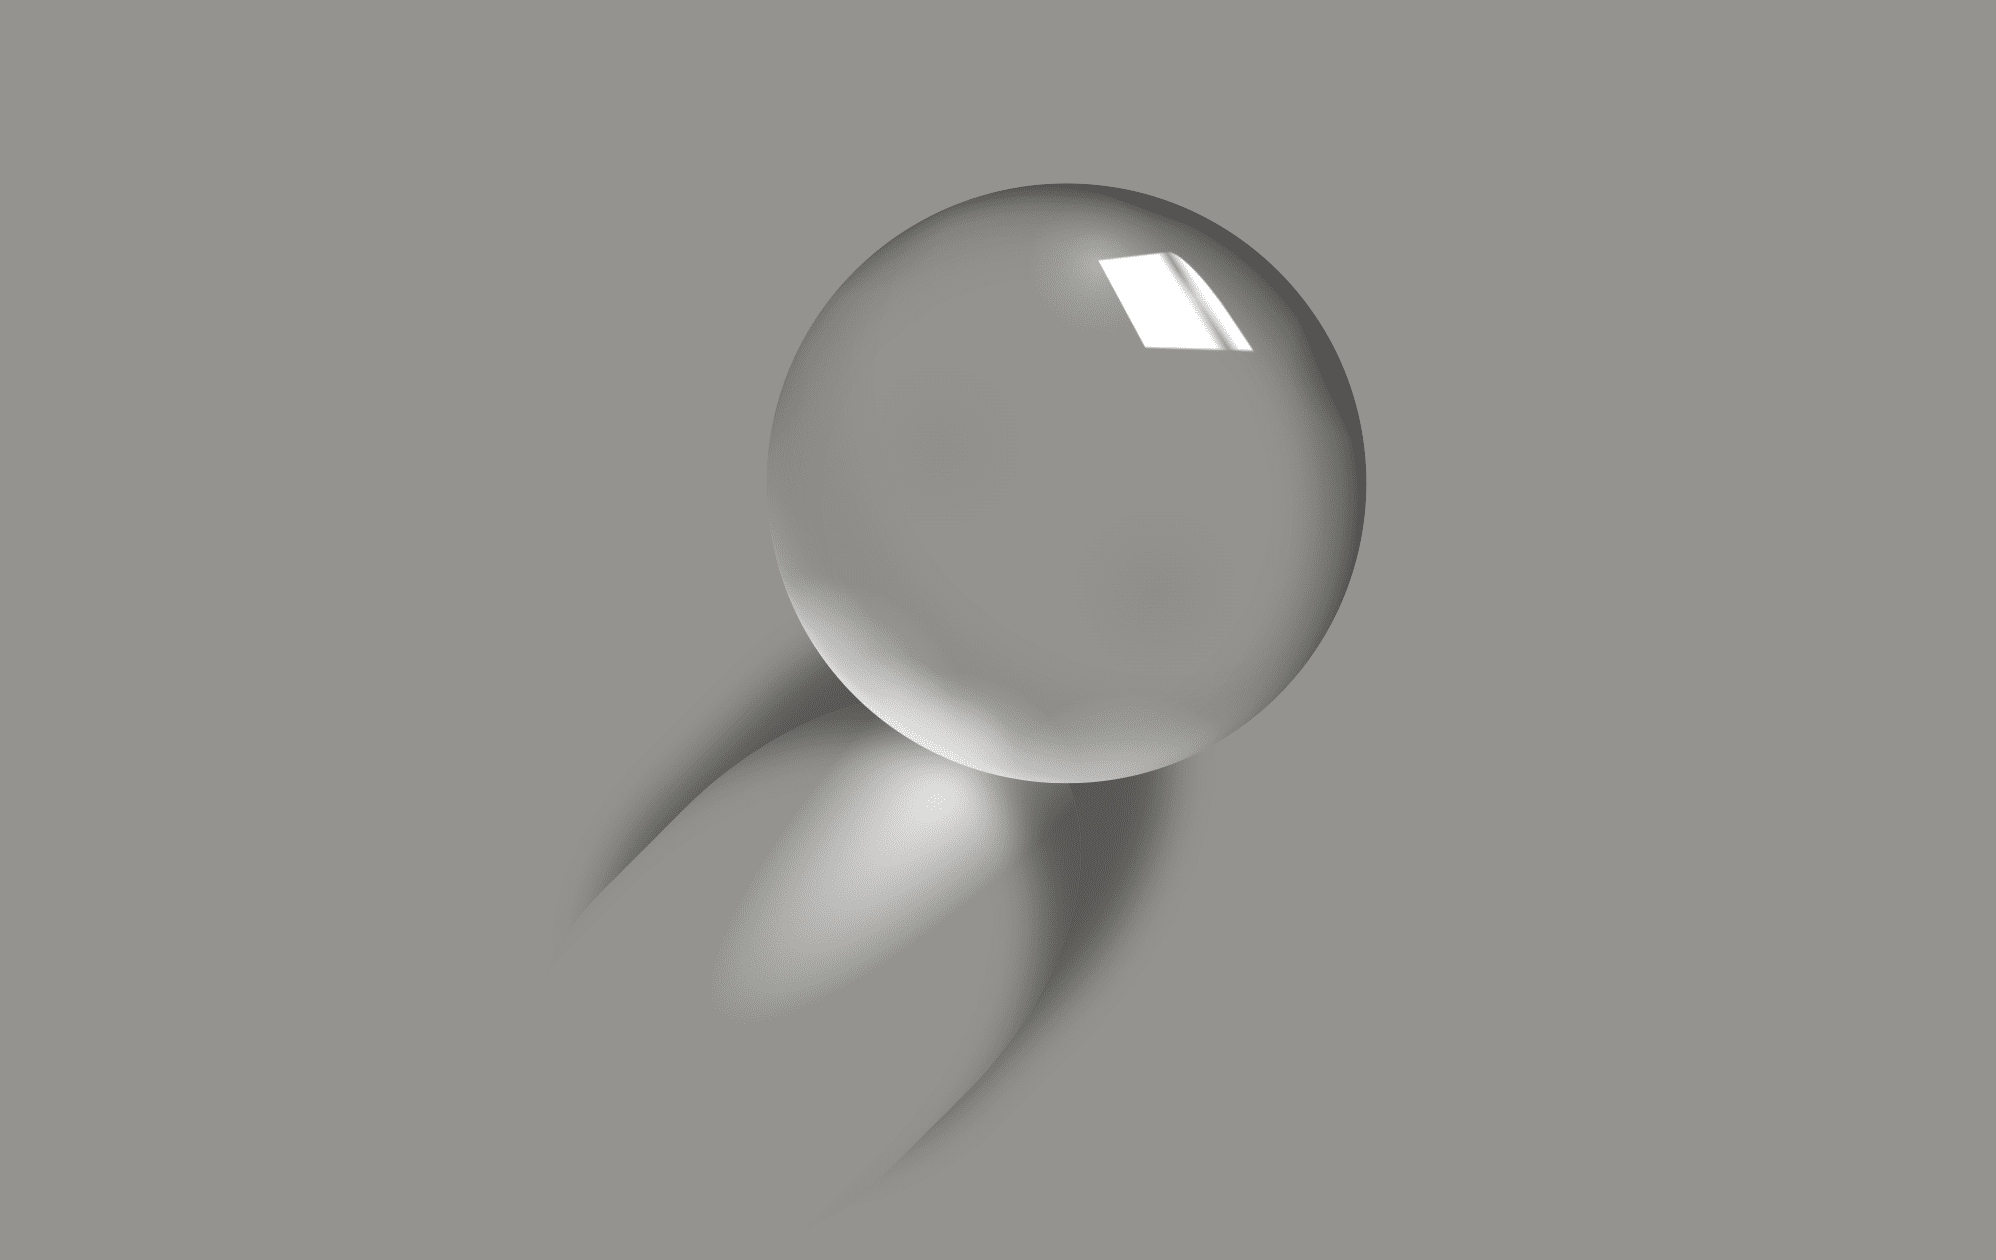 A glass sphere